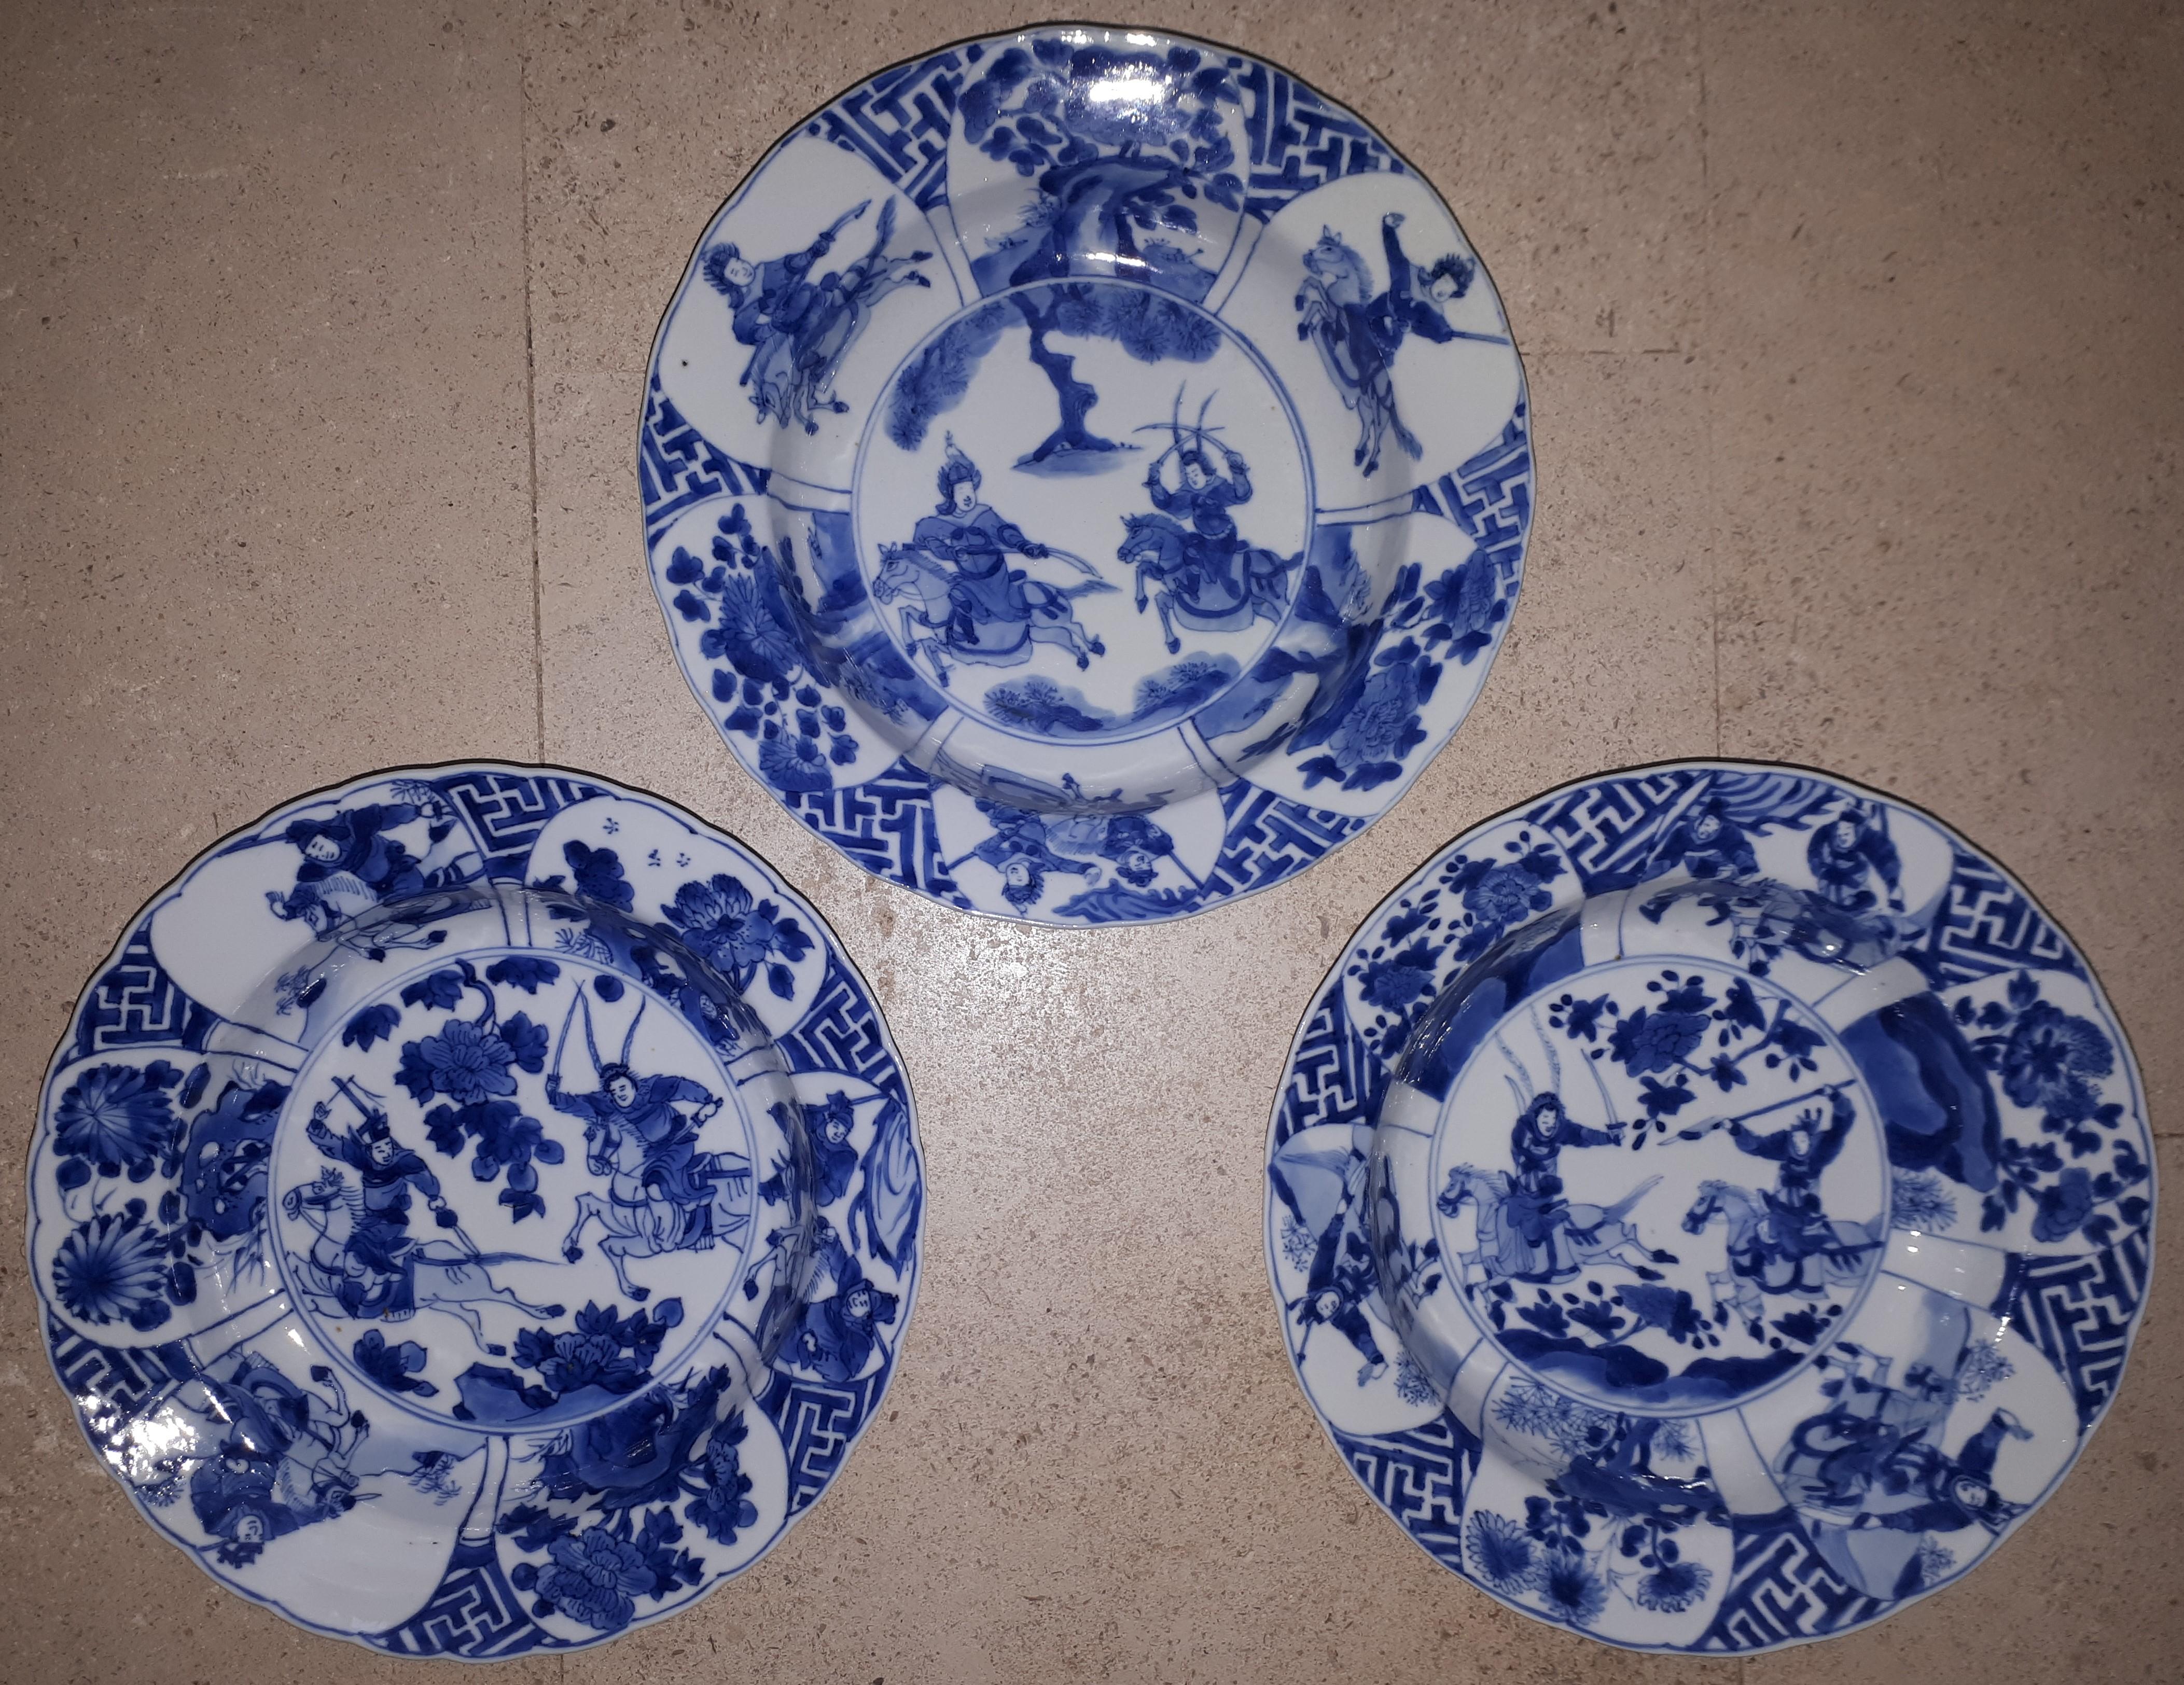 Slightly lobed plates in six braces with flared rims decorated in blue underglaze with warriors.
Zero defects, plates in rare perfect condition.
China, late 17th century.